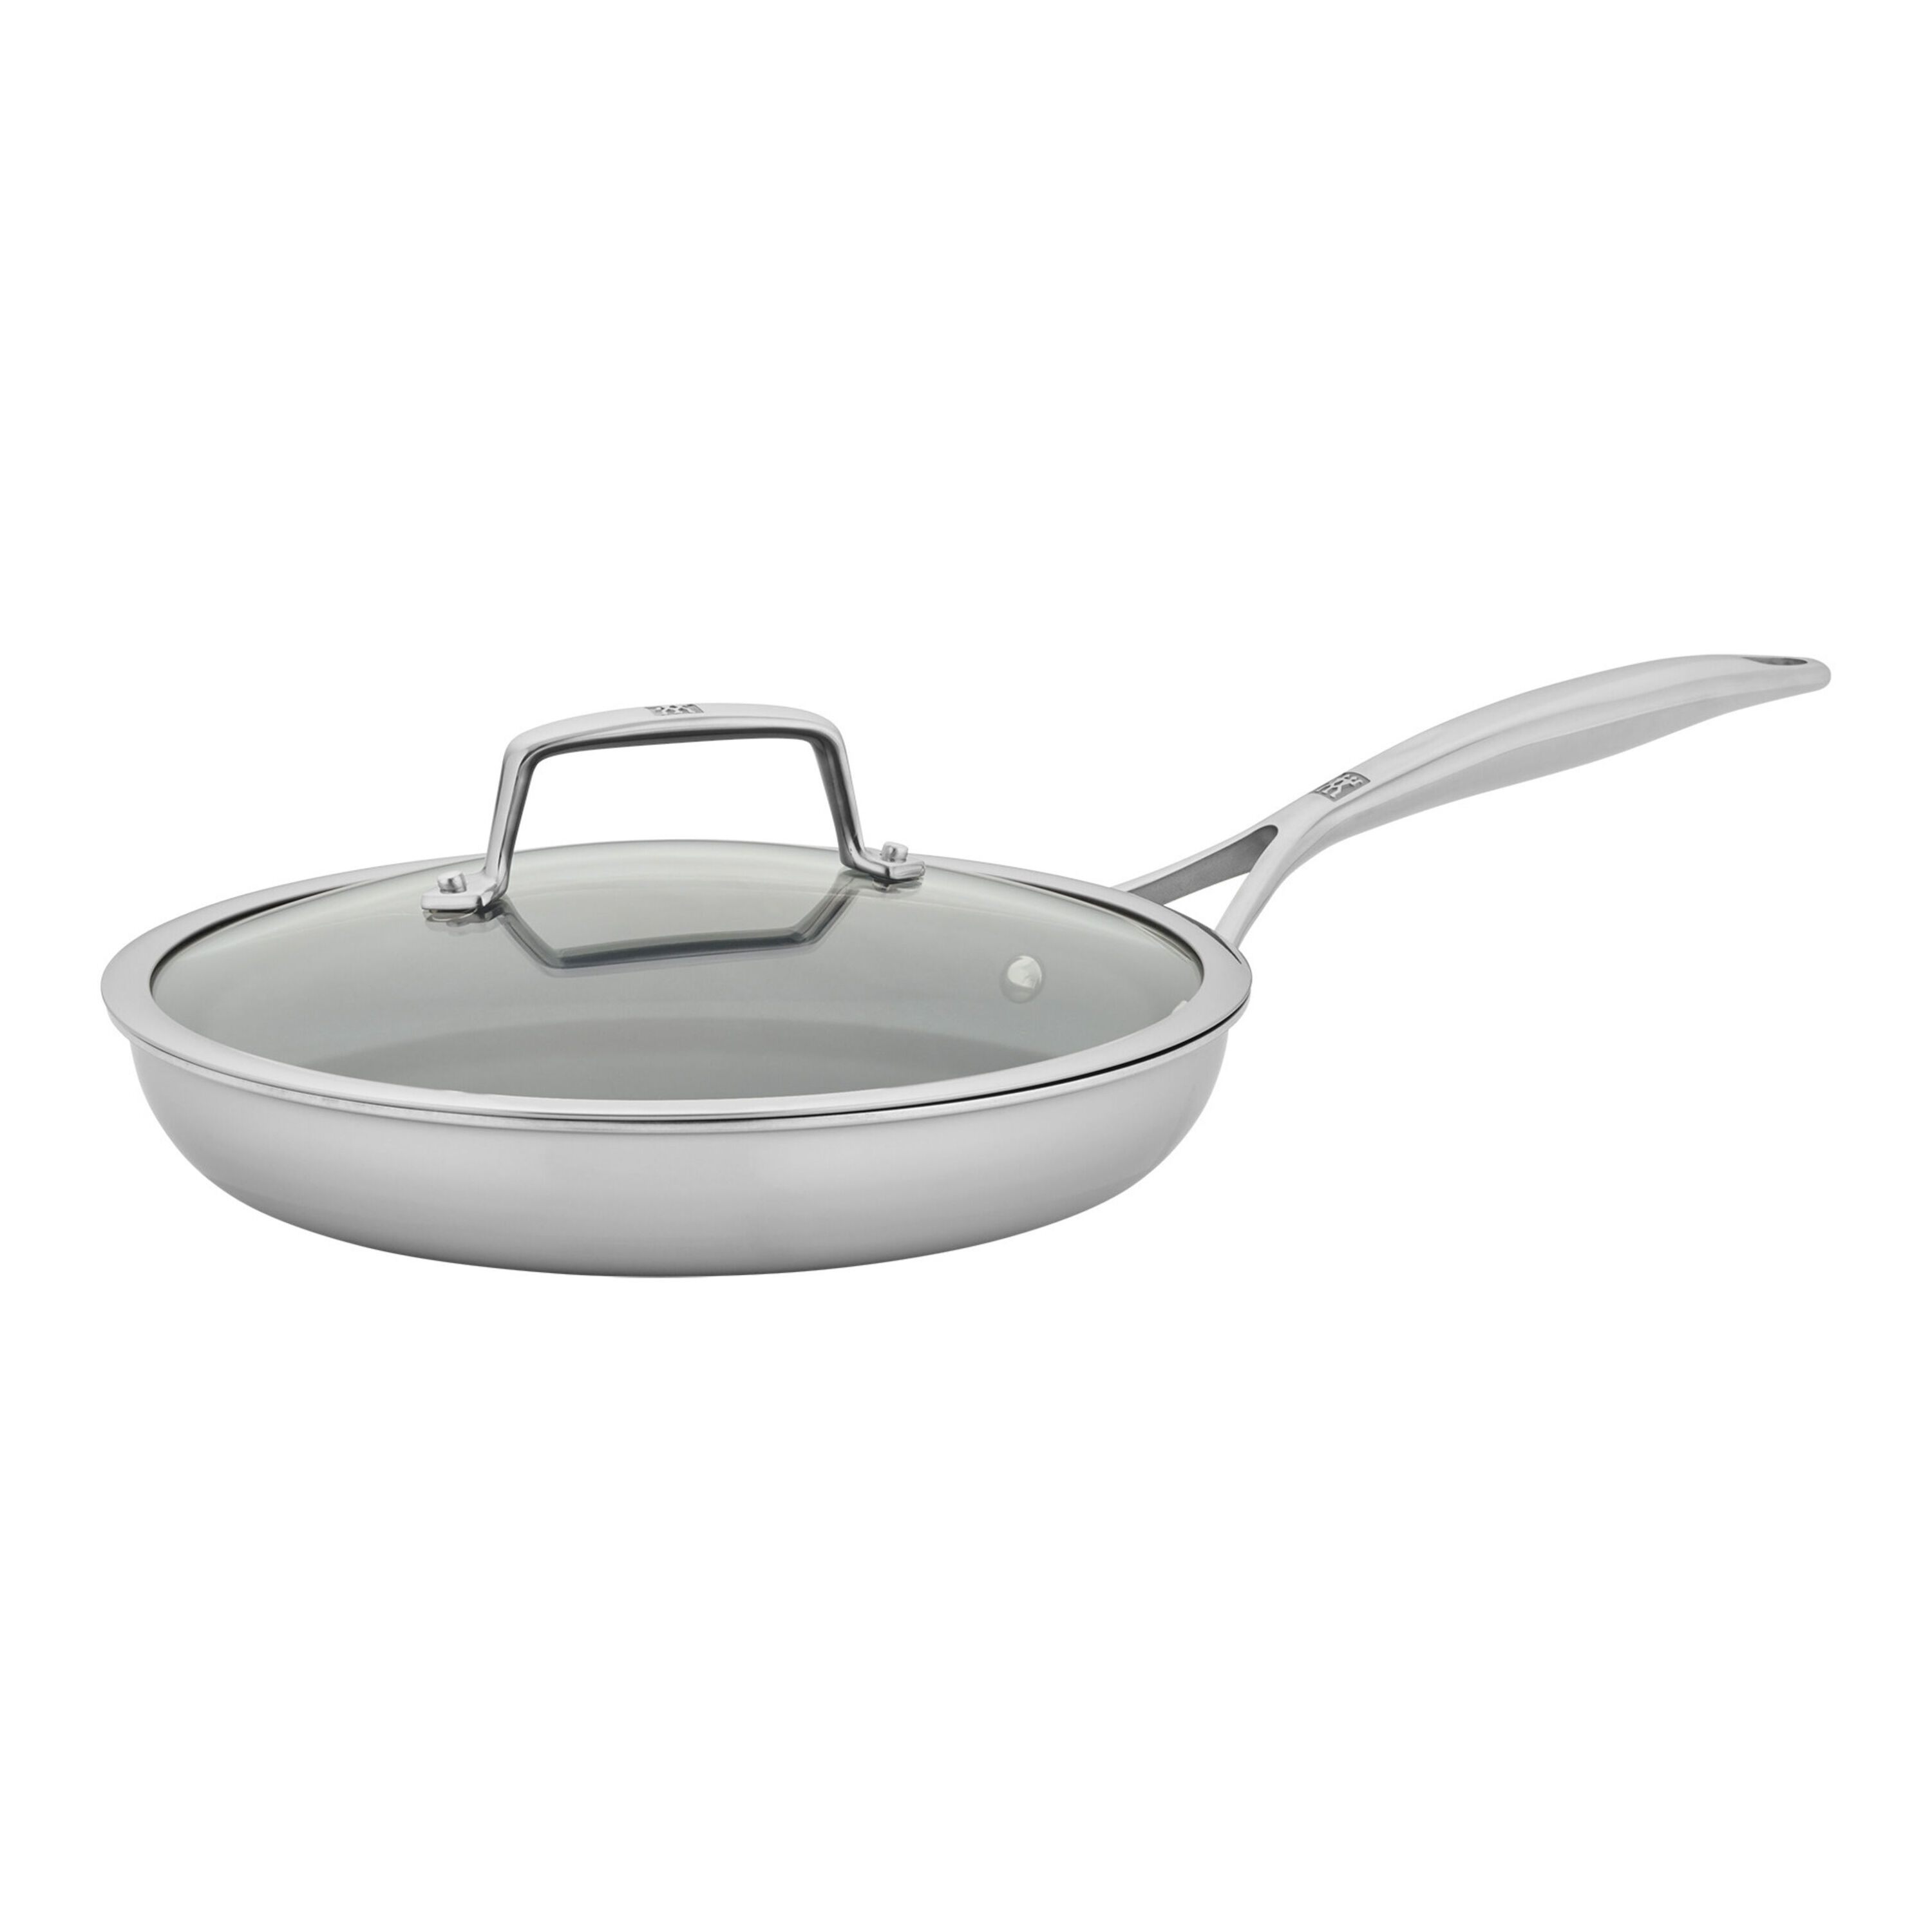 Zwilling Energy Plus 2-pc, 18/10 Stainless Steel, Non-Stick, Frying Pan Set